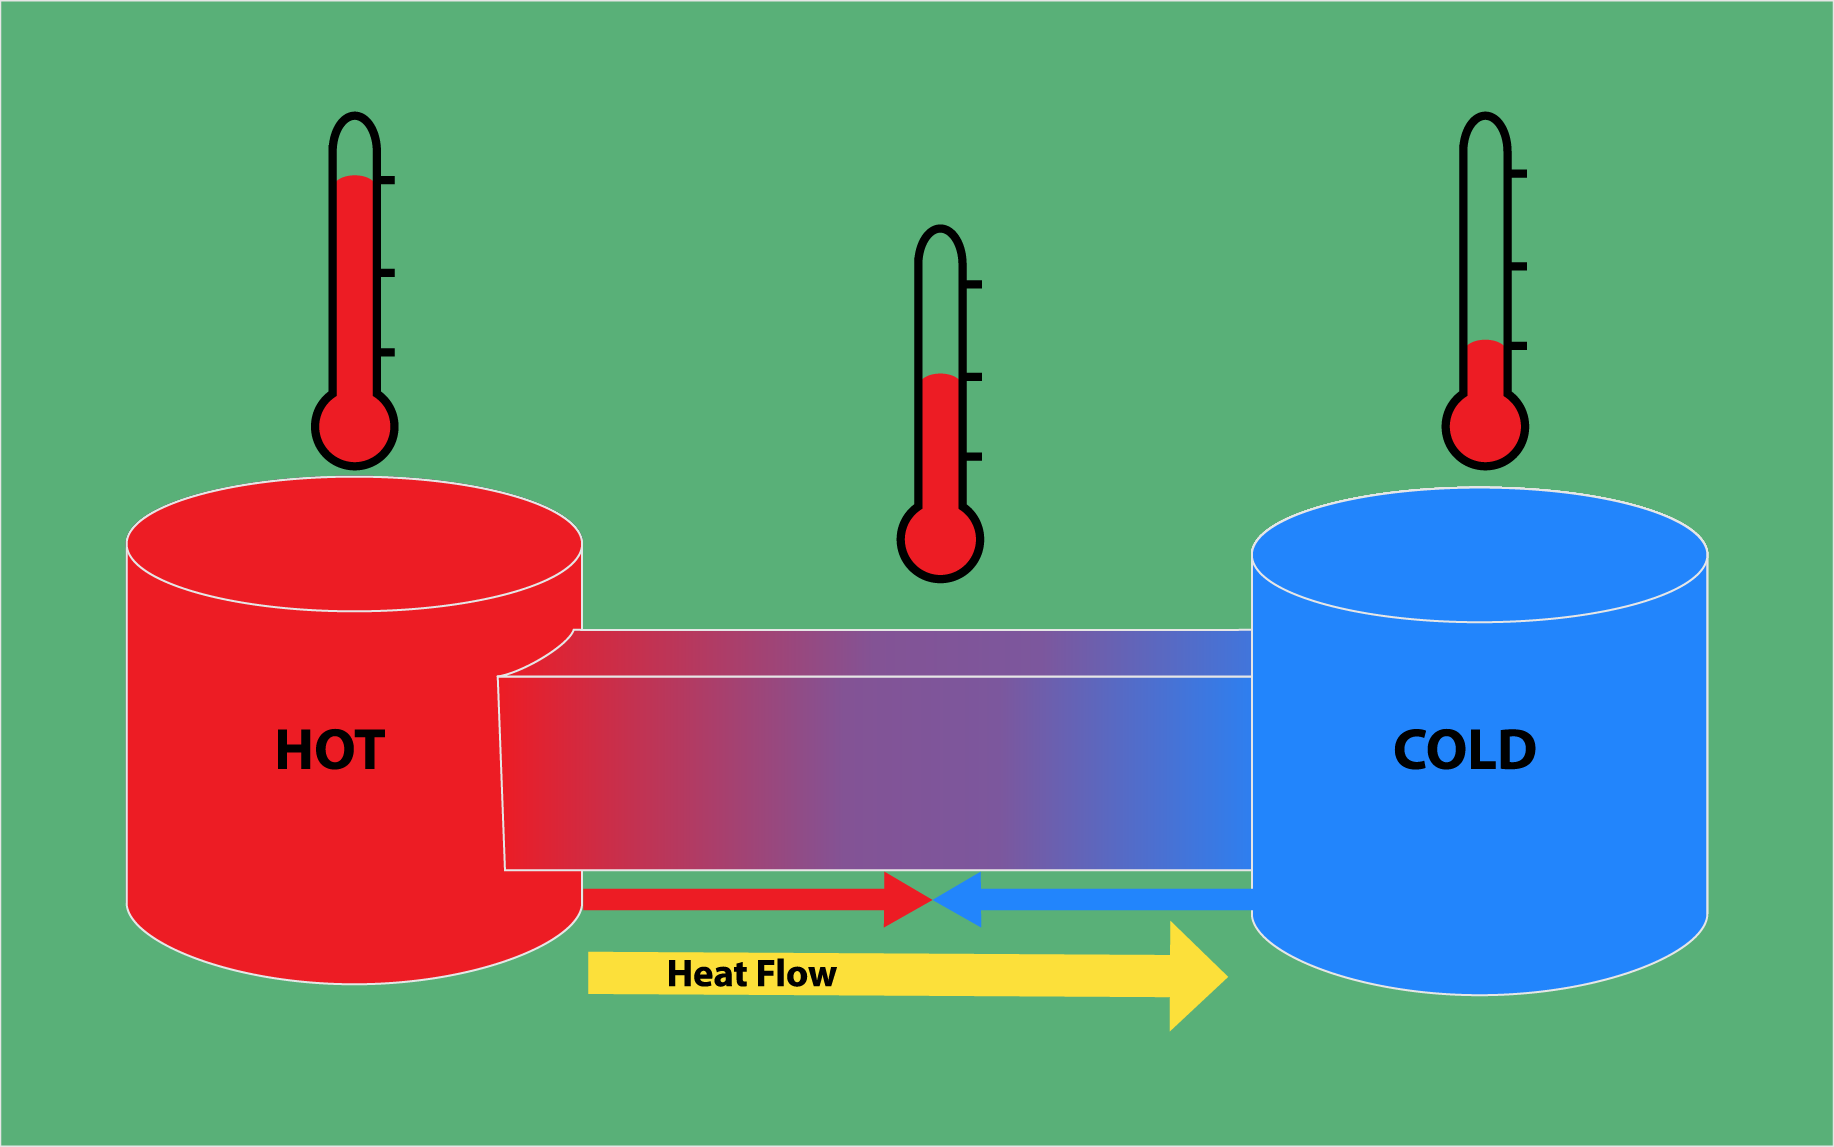 Heat
                  flows from hot to cold